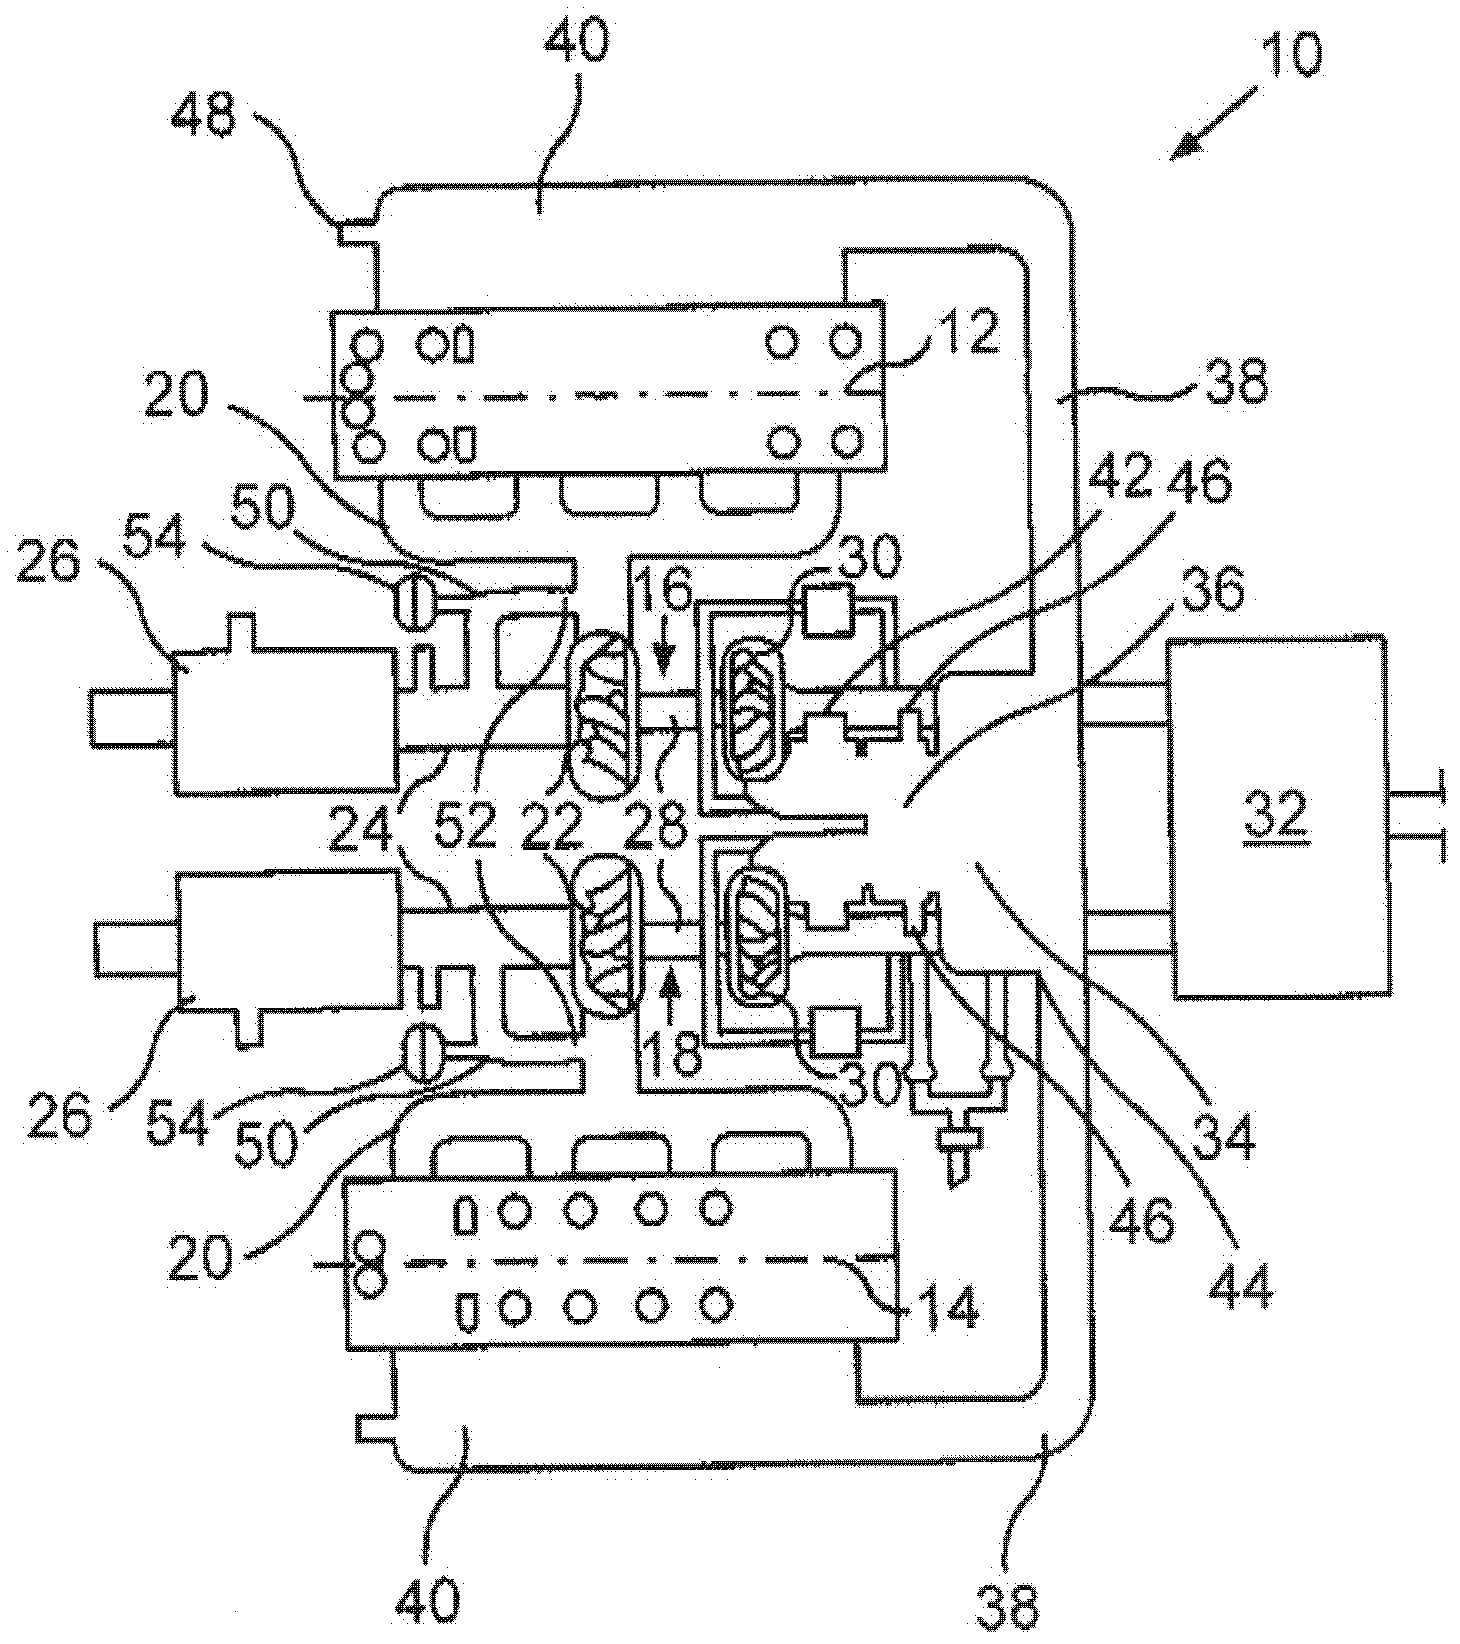 Method For Operating A Motor Vehicle With Two Turbochargers